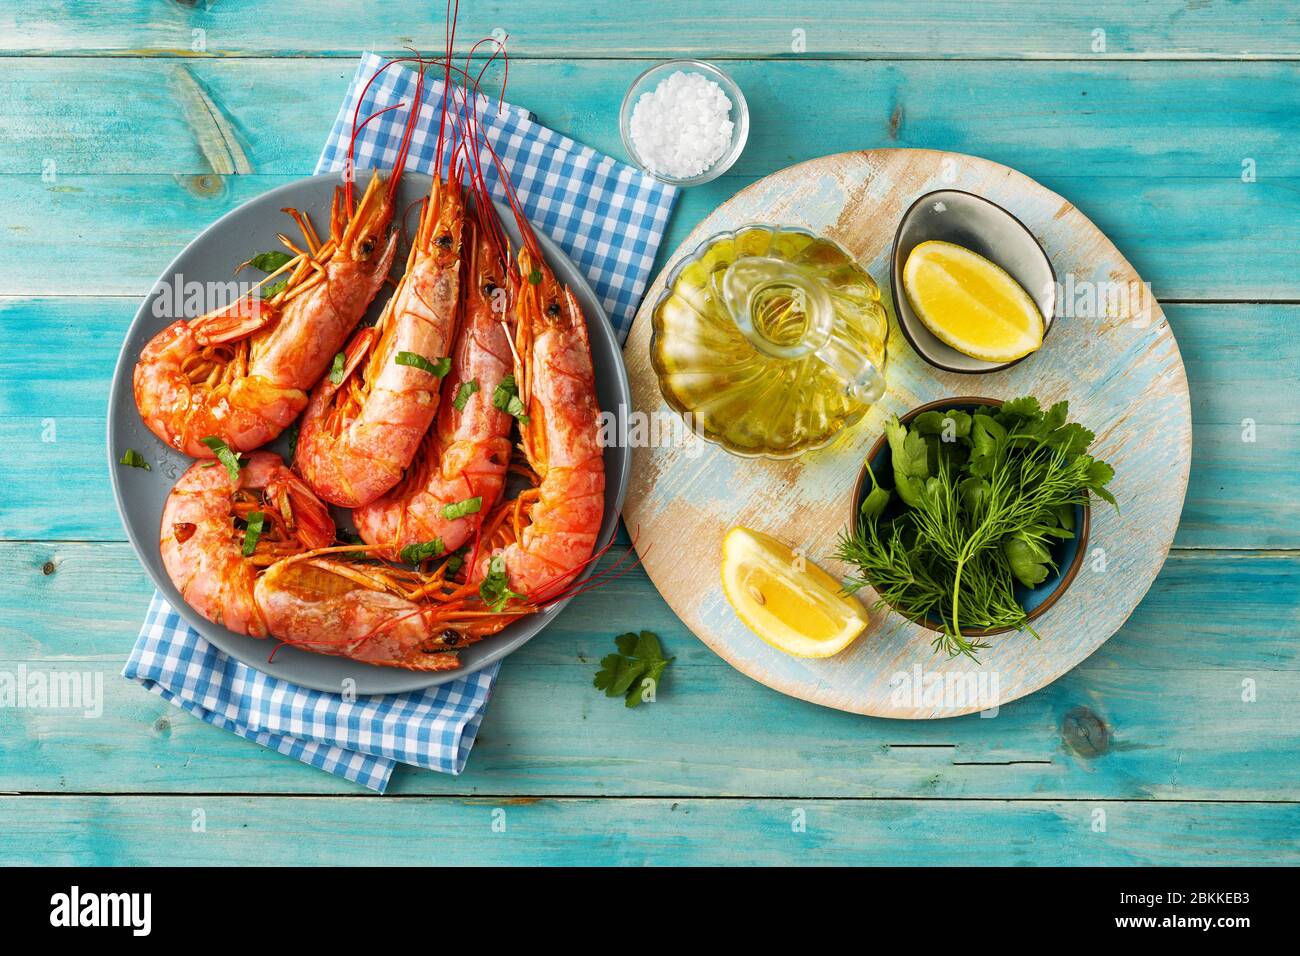 Top view of blue color dining table with cooked red prawns and ingredients Stock Photo